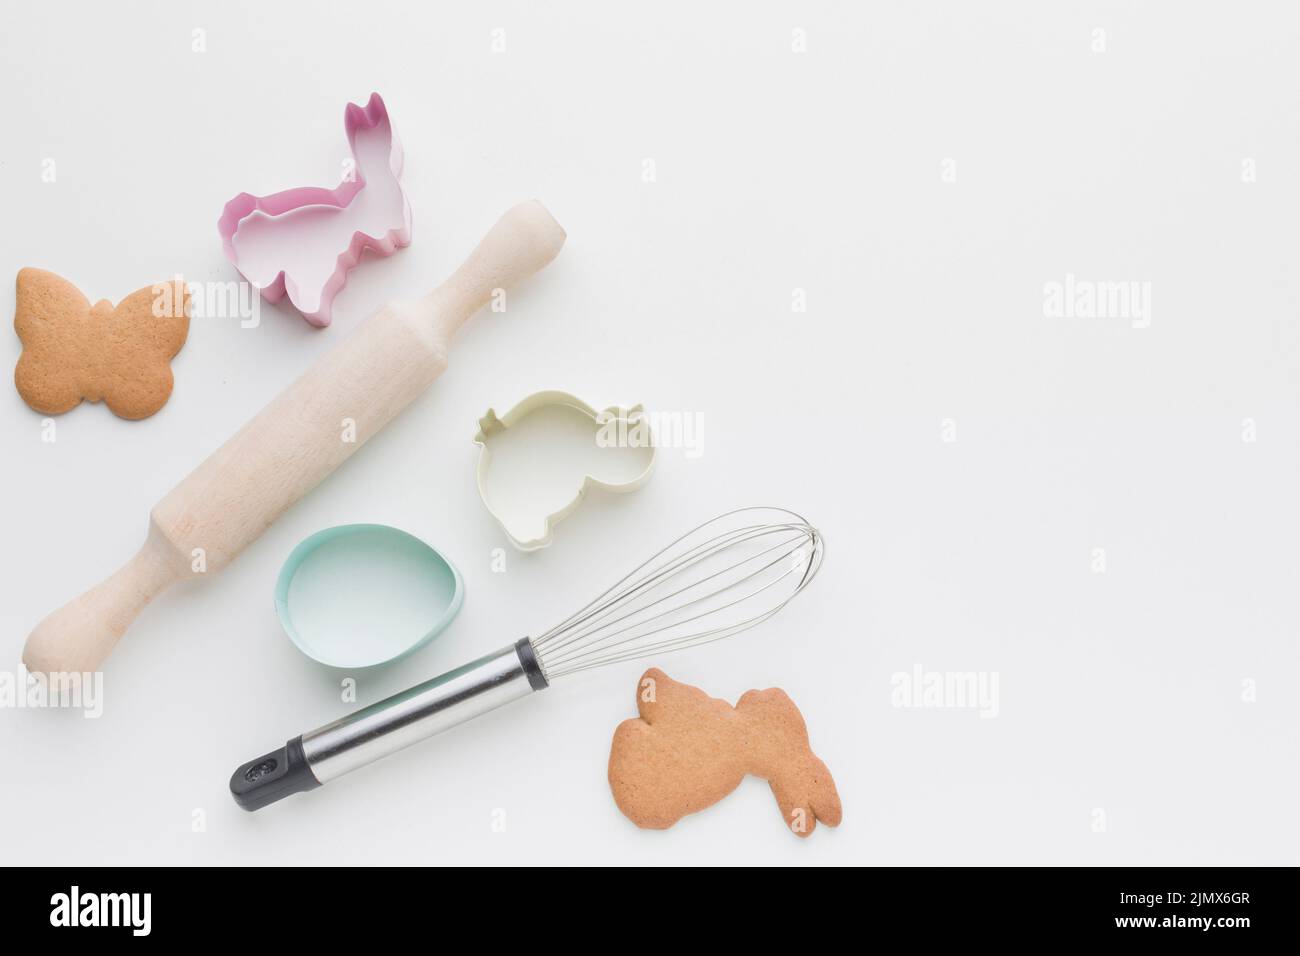 Flat lay kitchen utensils bunny shaped forms cookies Stock Photo